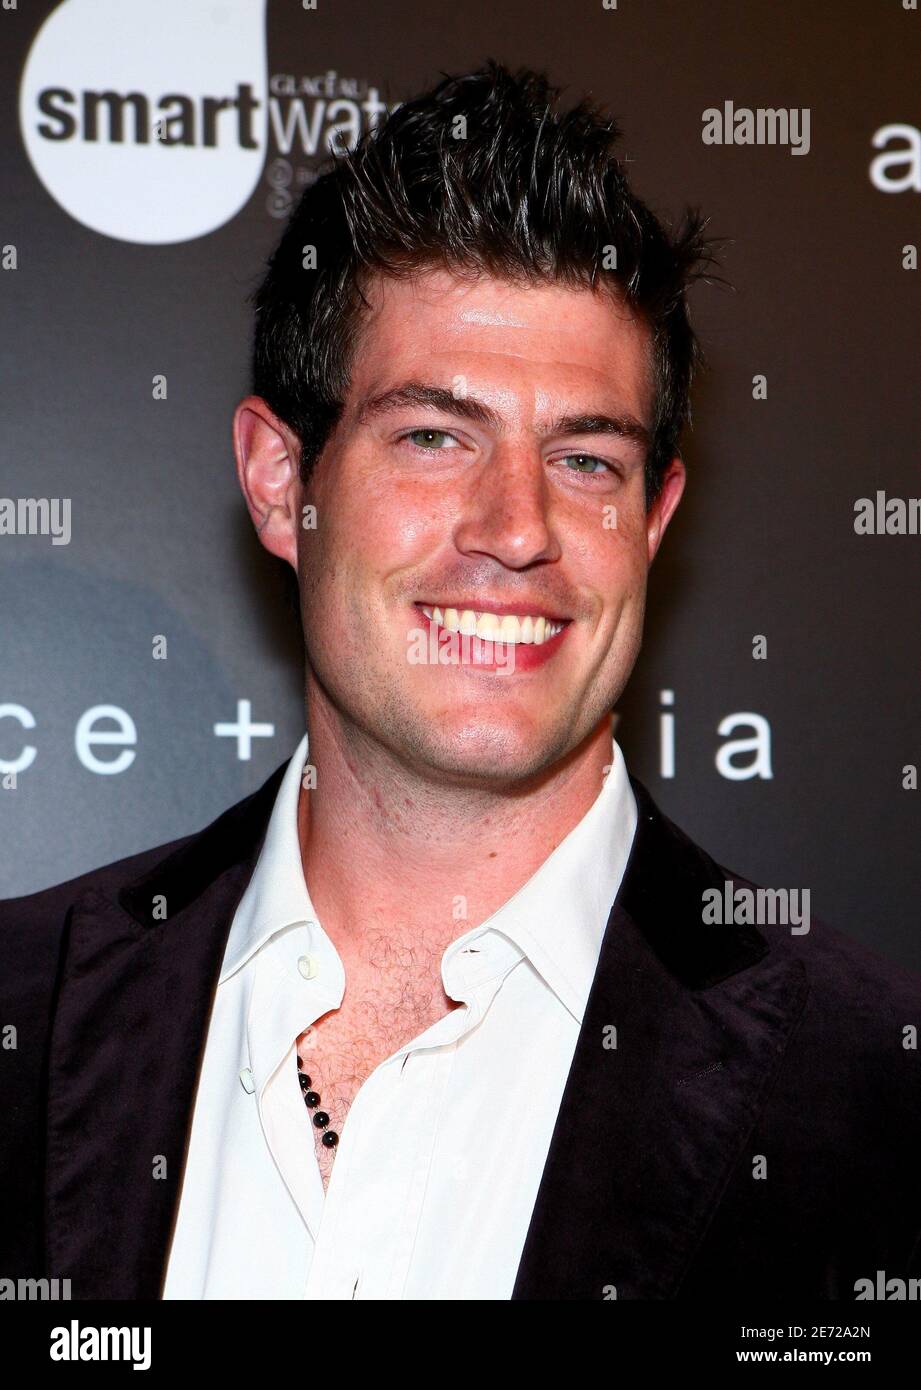 Feb. 9, 2007 - New York City: Jesse Palmer at the Alice + Olivia fashion show at 'The Atelier' during Mercedes-Benz Fall 2007 fashion week. Photo by Sara Jaye Weiss/AbacaUSA.com (pictured: Jesse Palmer) Stock Photo